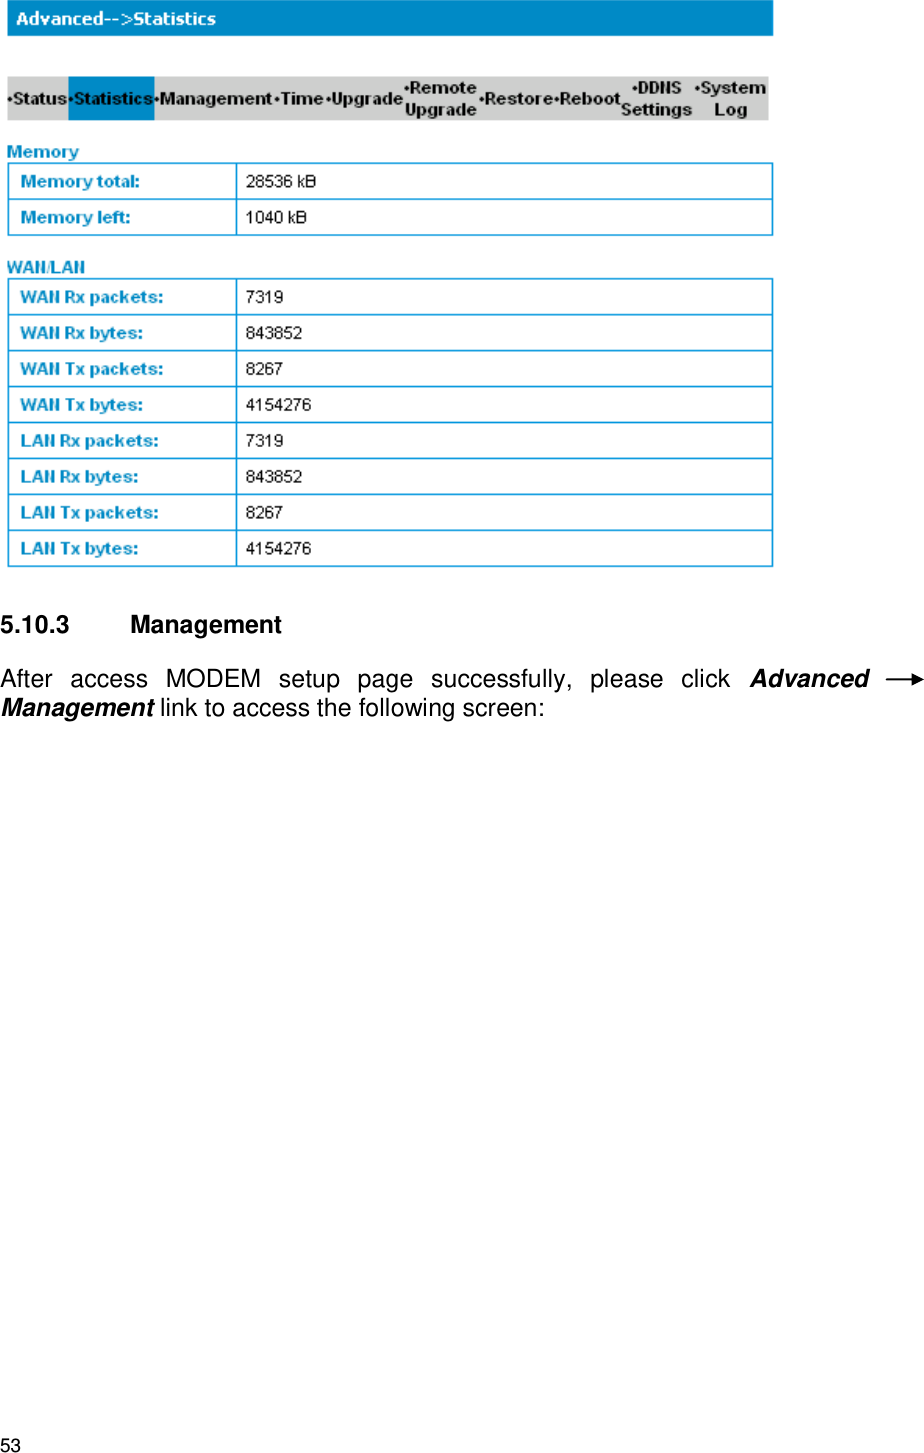 53  5.10.3  Management After  access  MODEM  setup  page  successfully,  please  click  Advanced Management link to access the following screen: 